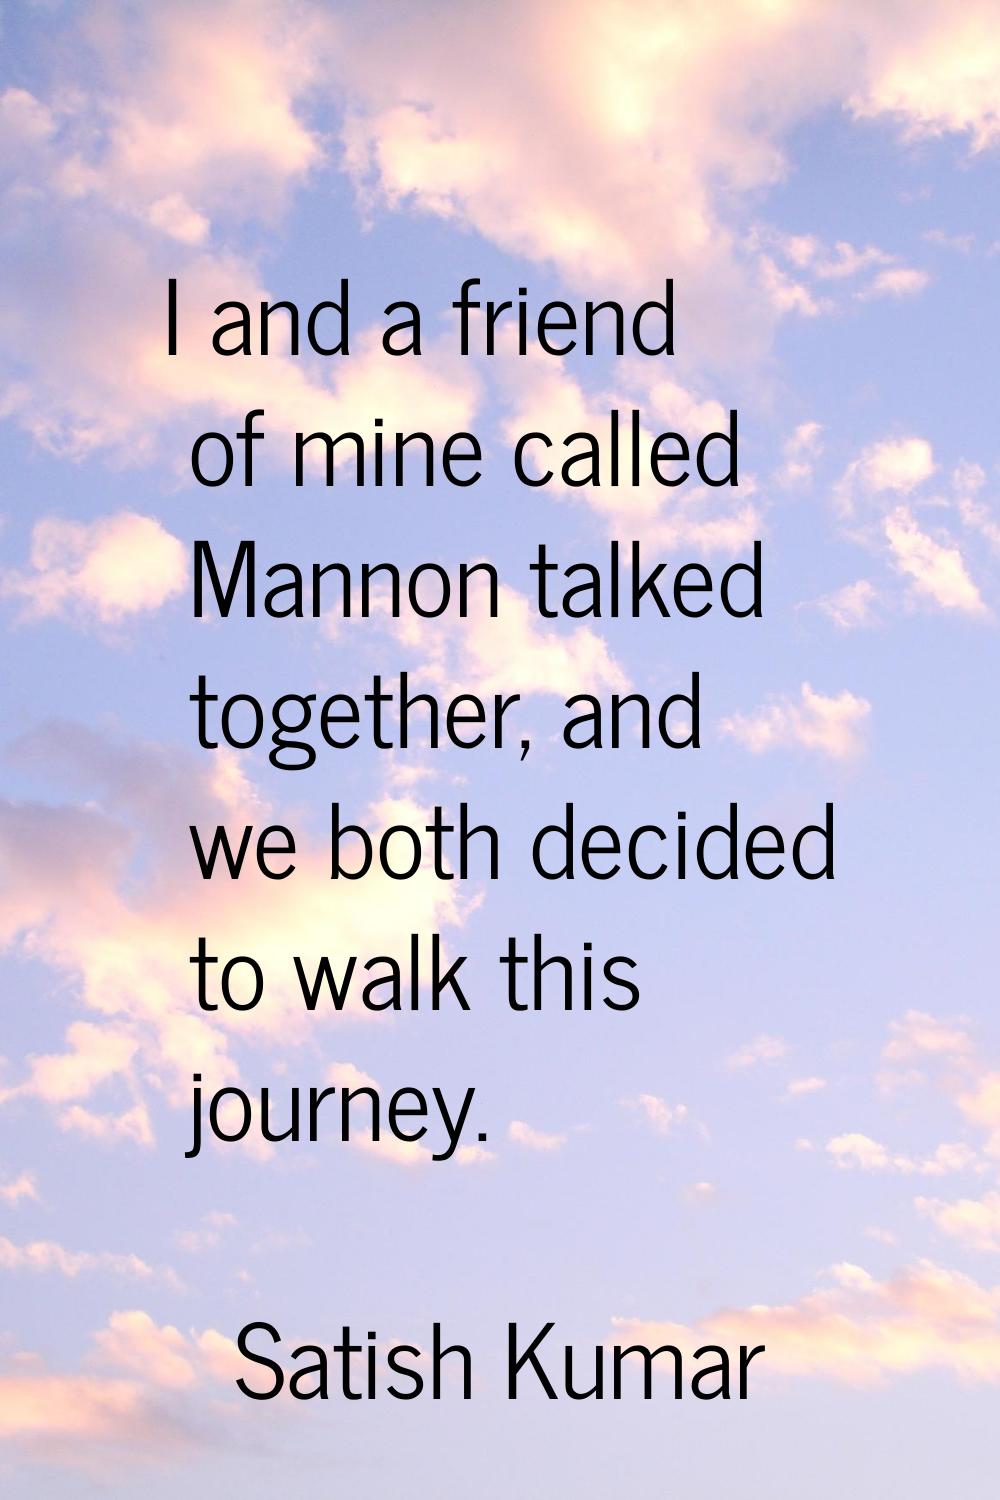 I and a friend of mine called Mannon talked together, and we both decided to walk this journey.